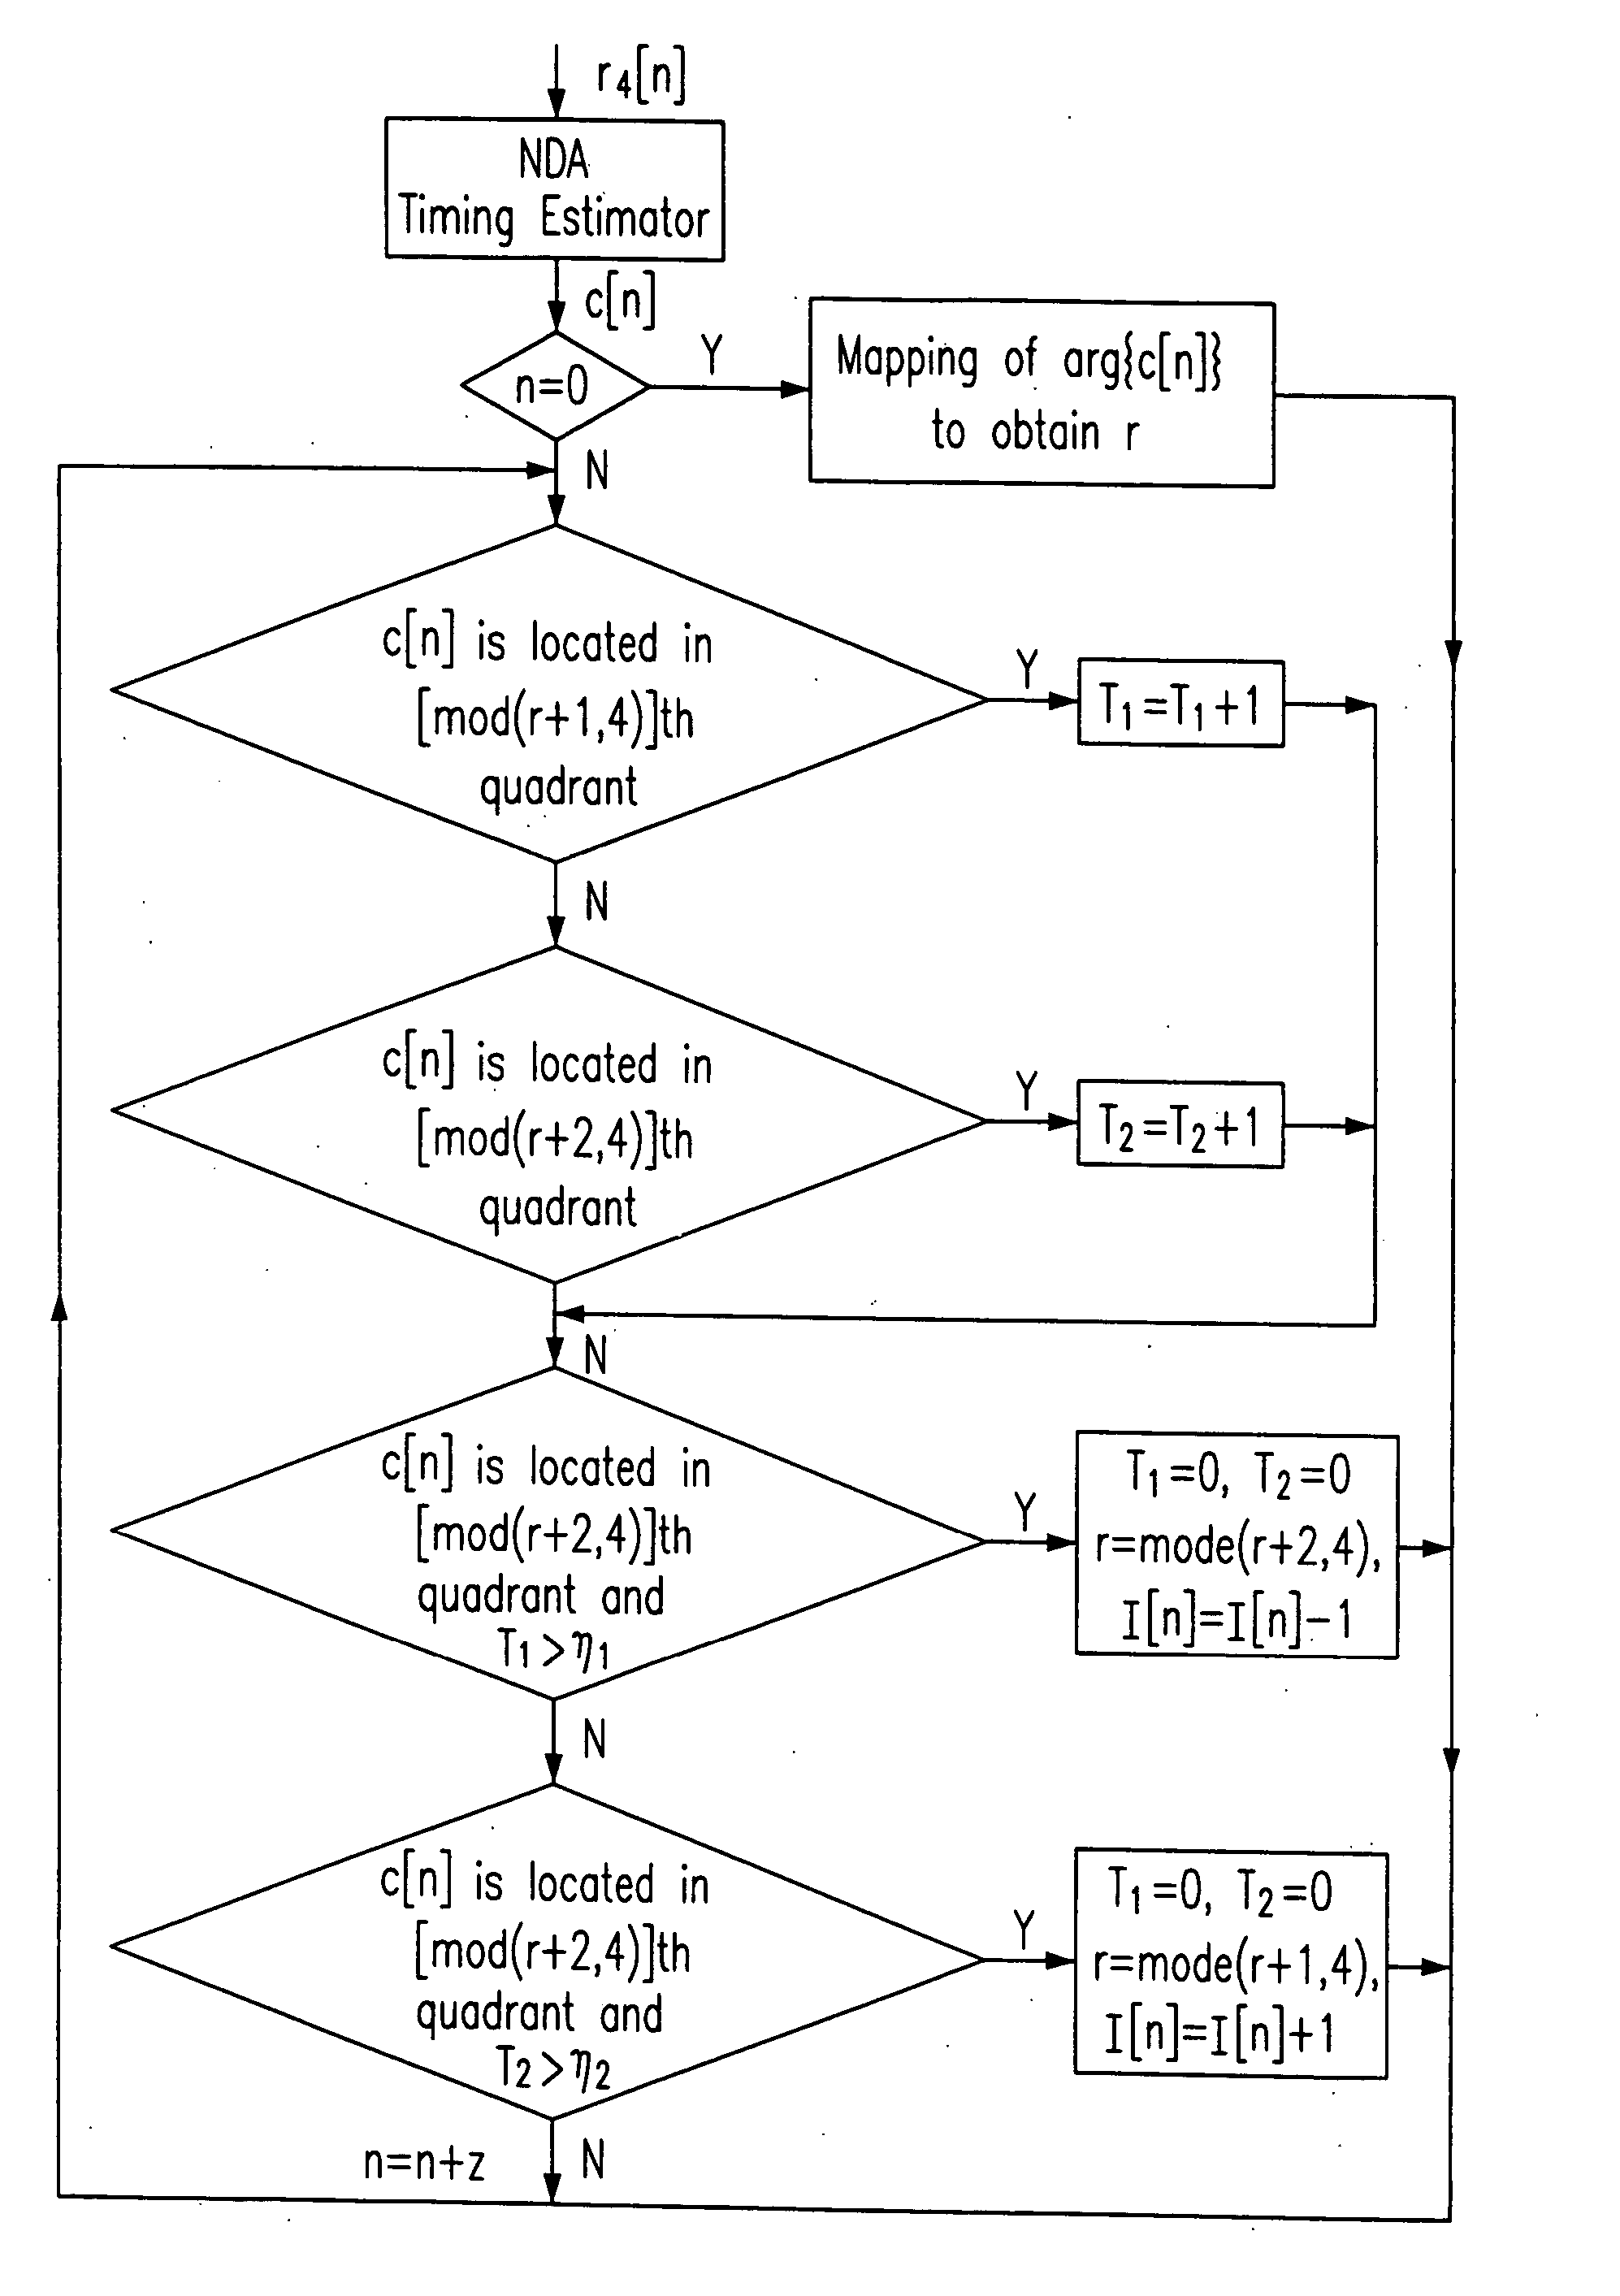 Clock offset compensation via signal windowing and non-data-aided (NDA) timing estimator